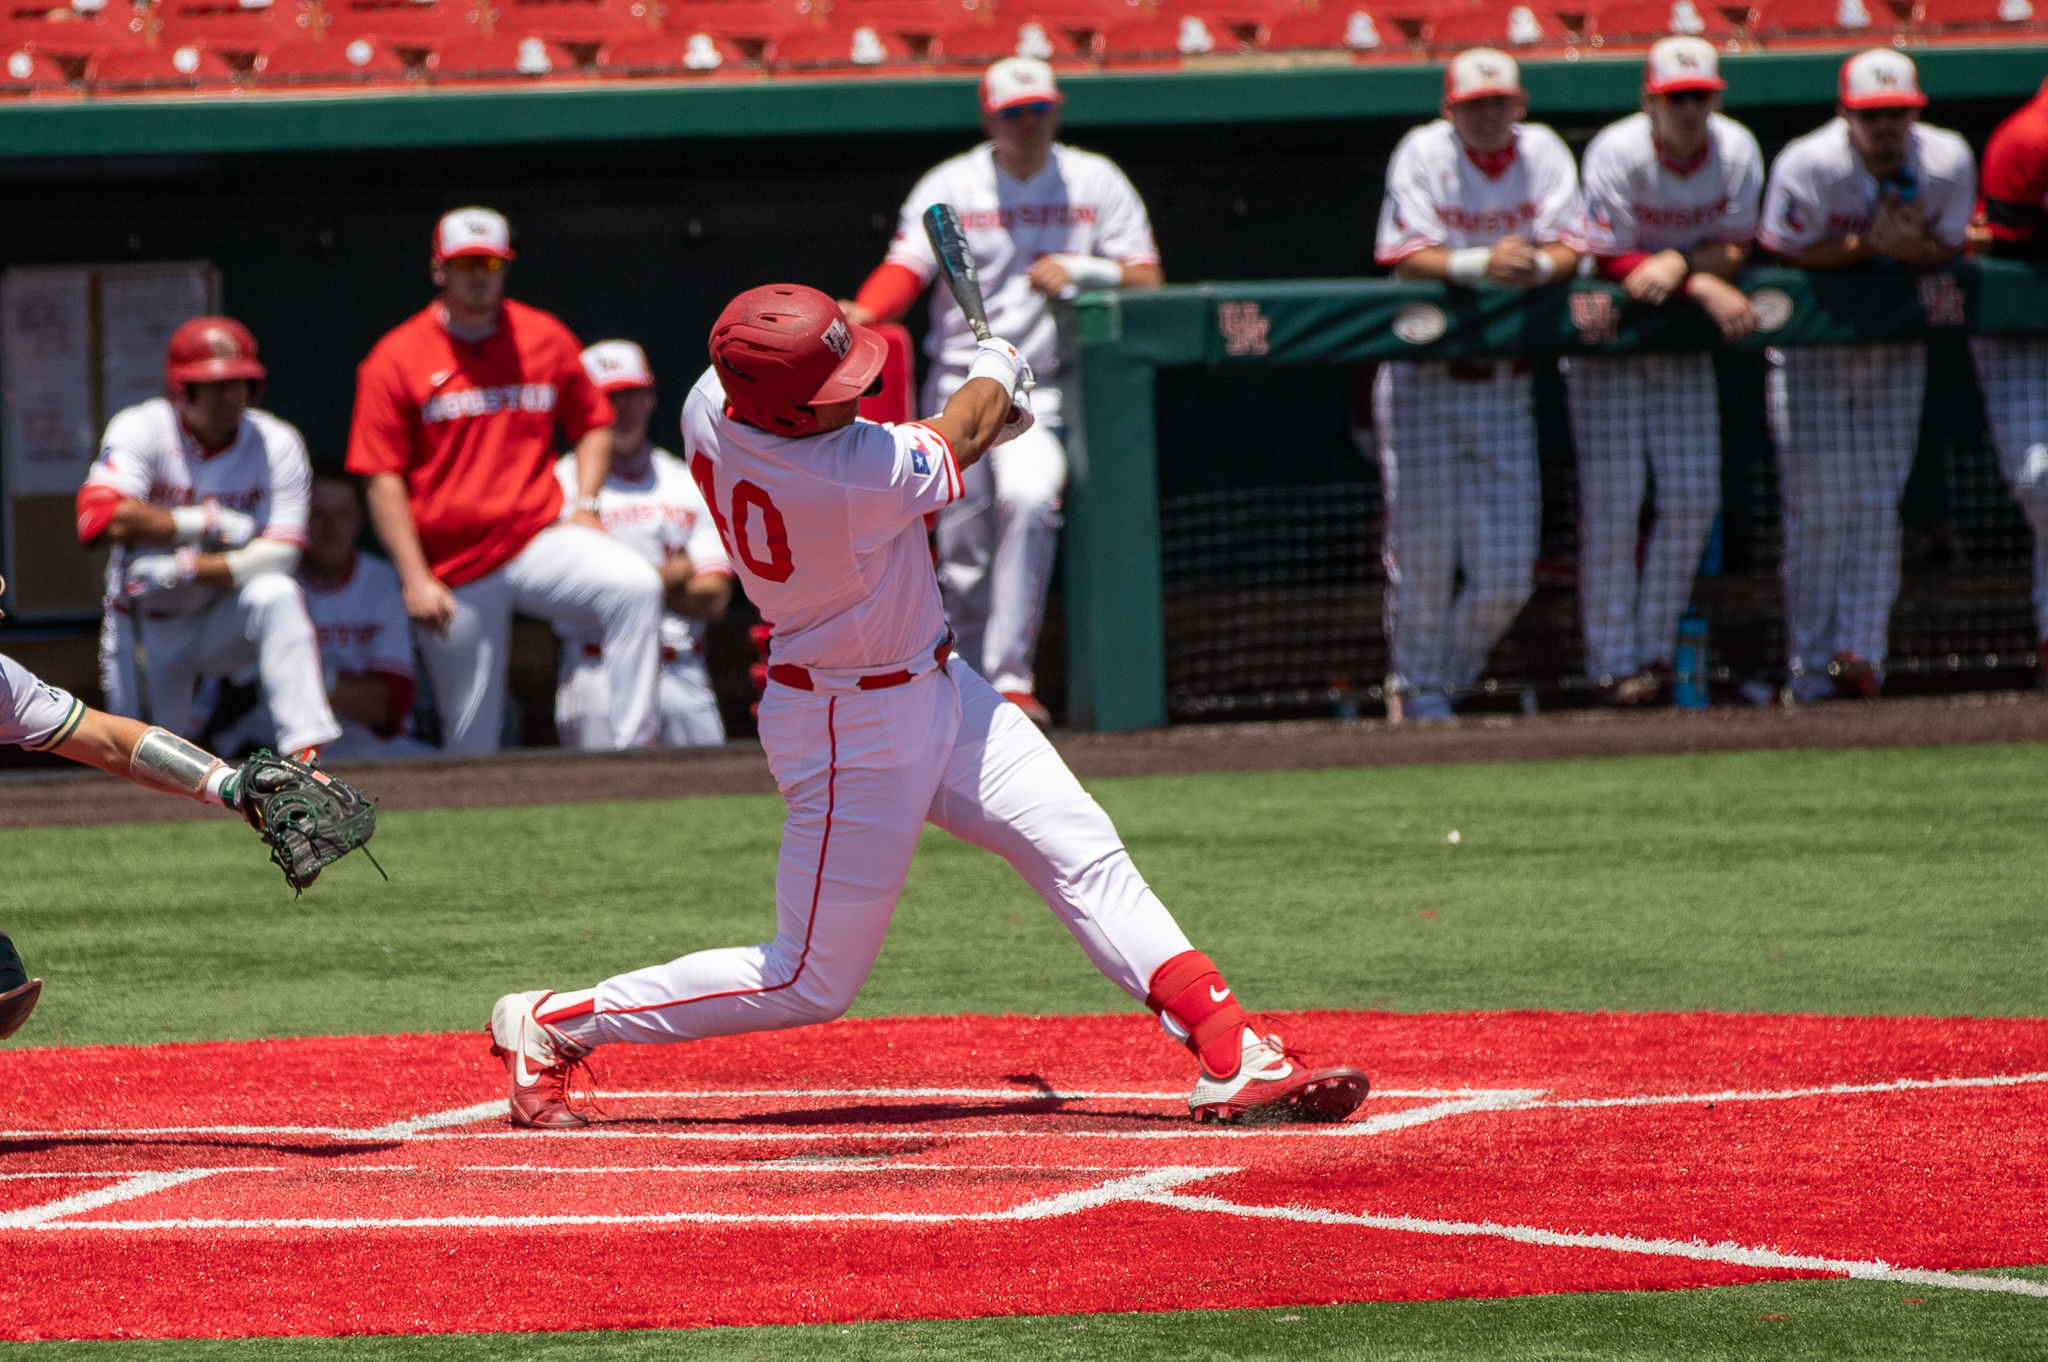 Junior first baseman Ryan Hernandez launched his eighth home run of the season in UH baseball's 6-5 victory over Cincinnati on Saturday. | Andy Yanez/The Cougar